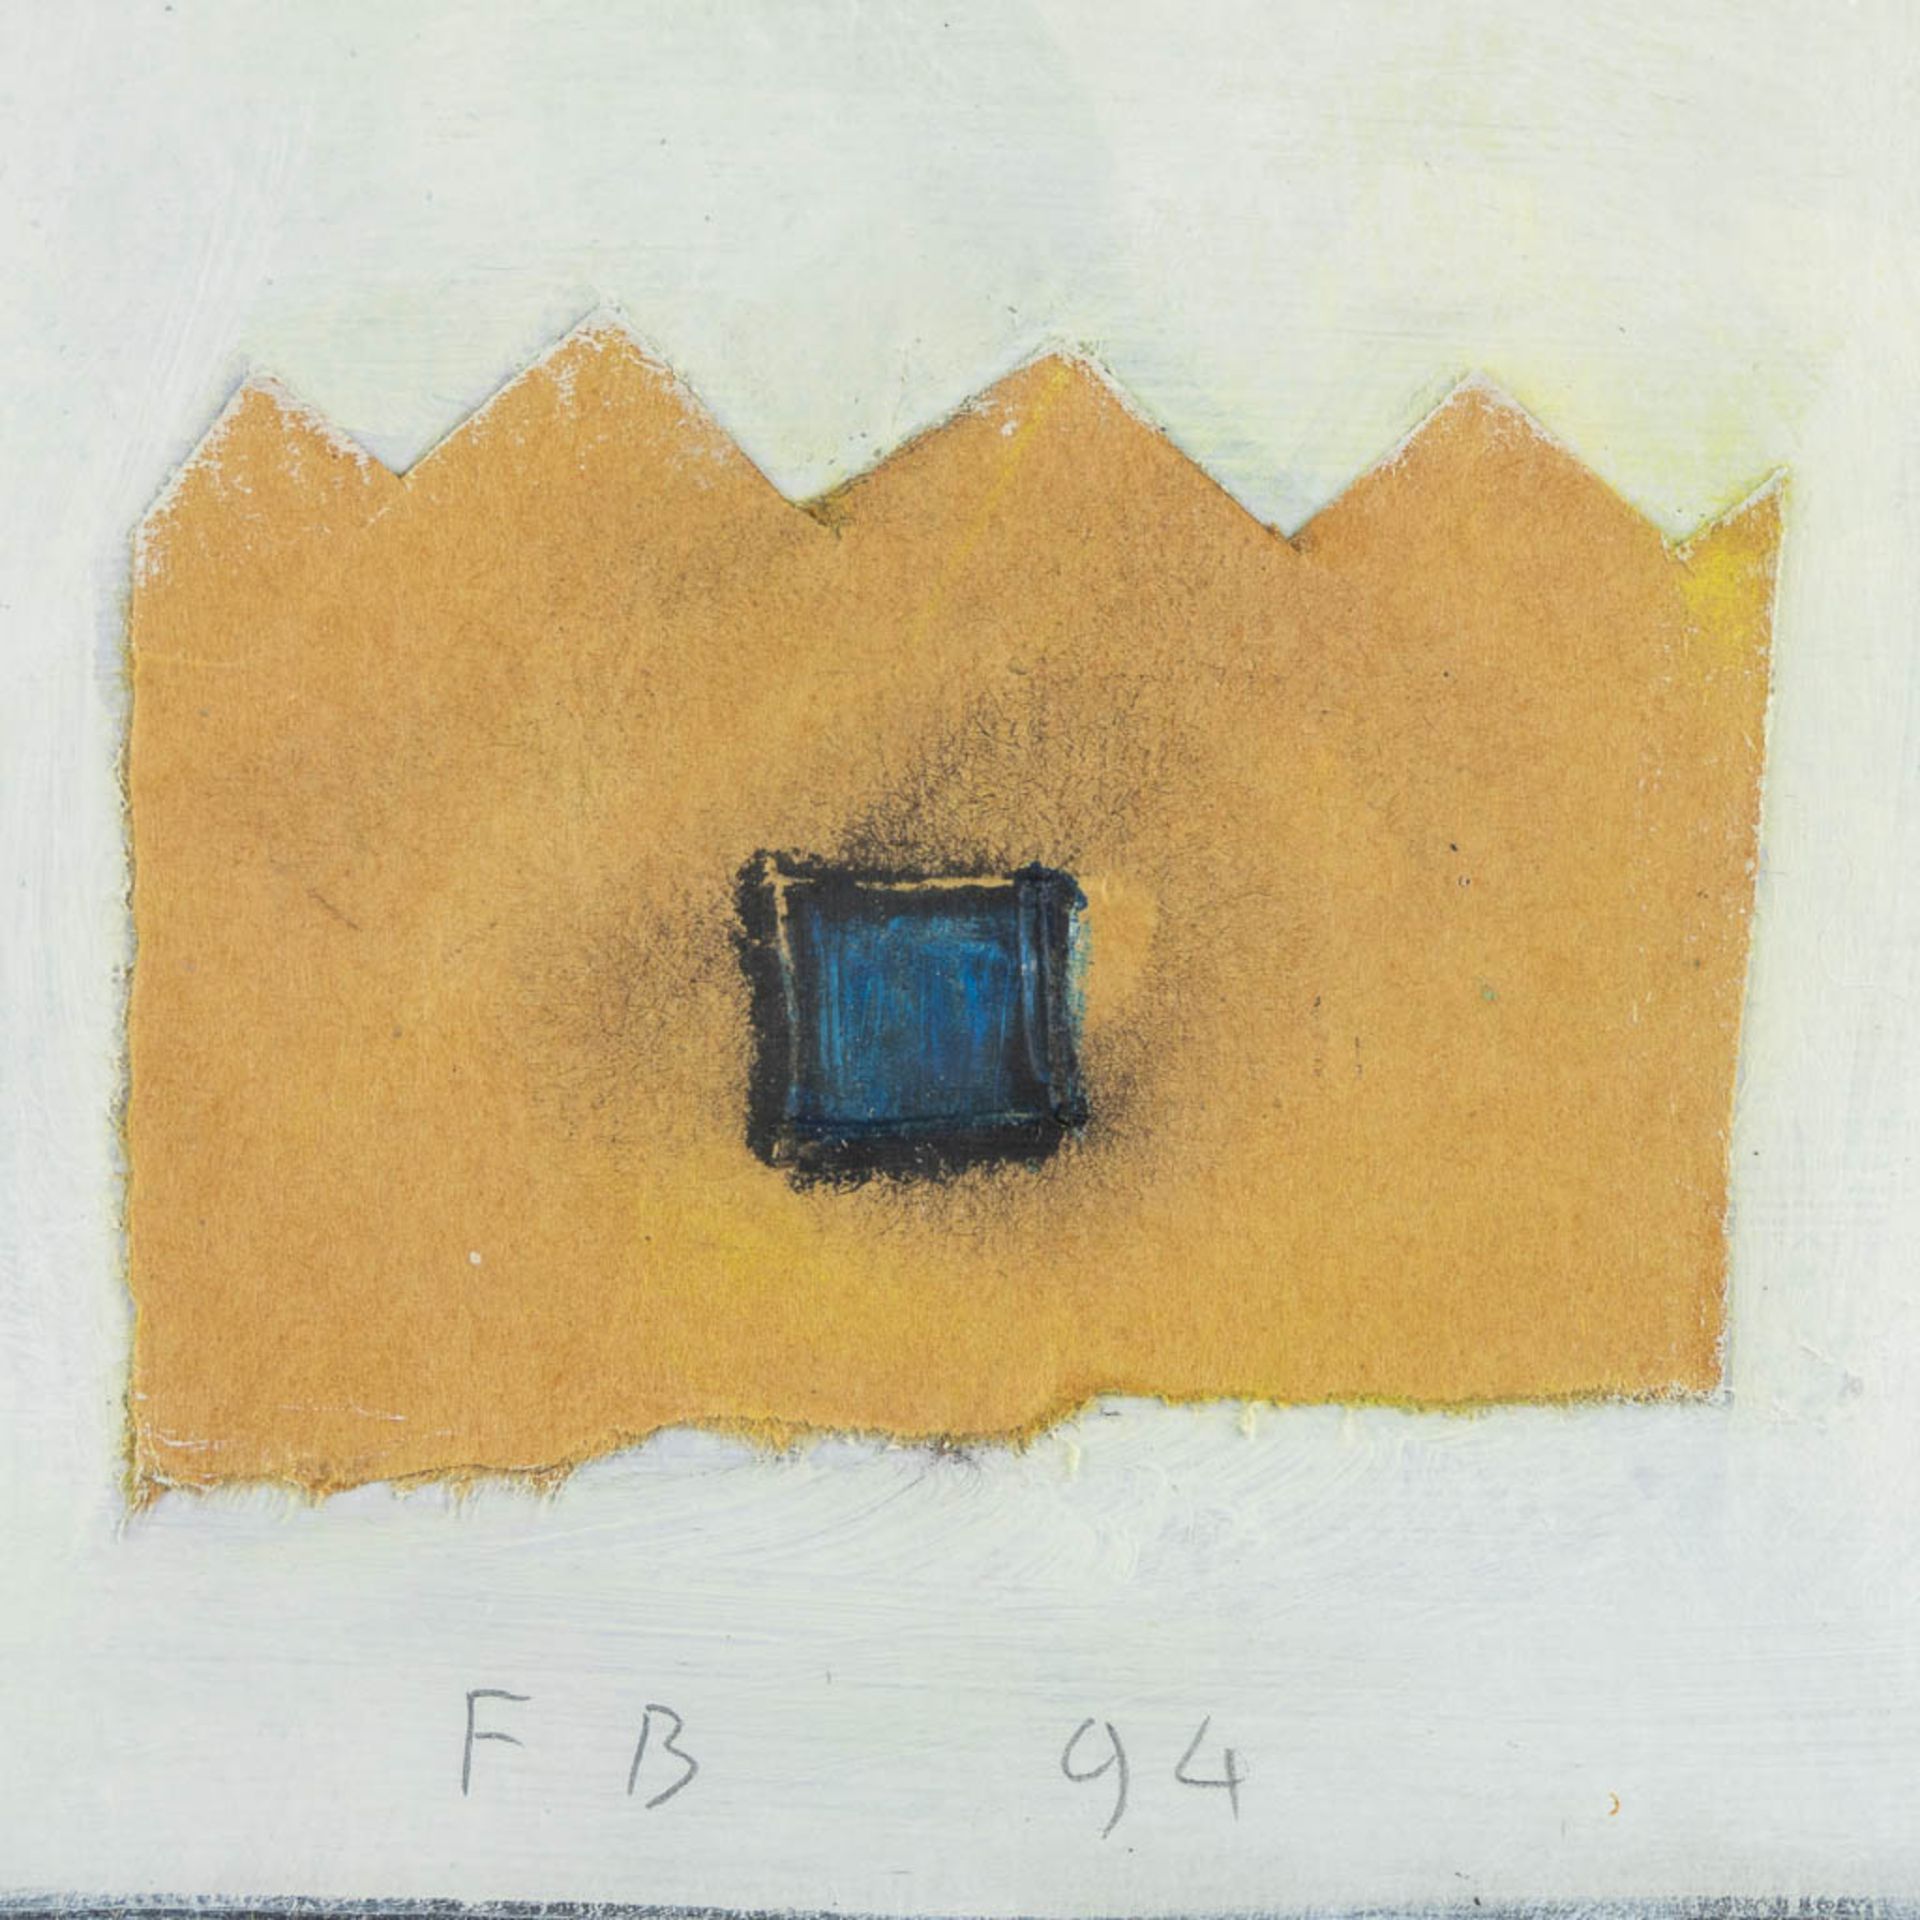 Fred BOFFIN (1946) 'Untitled' an abstract, oil on paper. 1994. (W:15,5 x H:21 cm) - Image 5 of 6